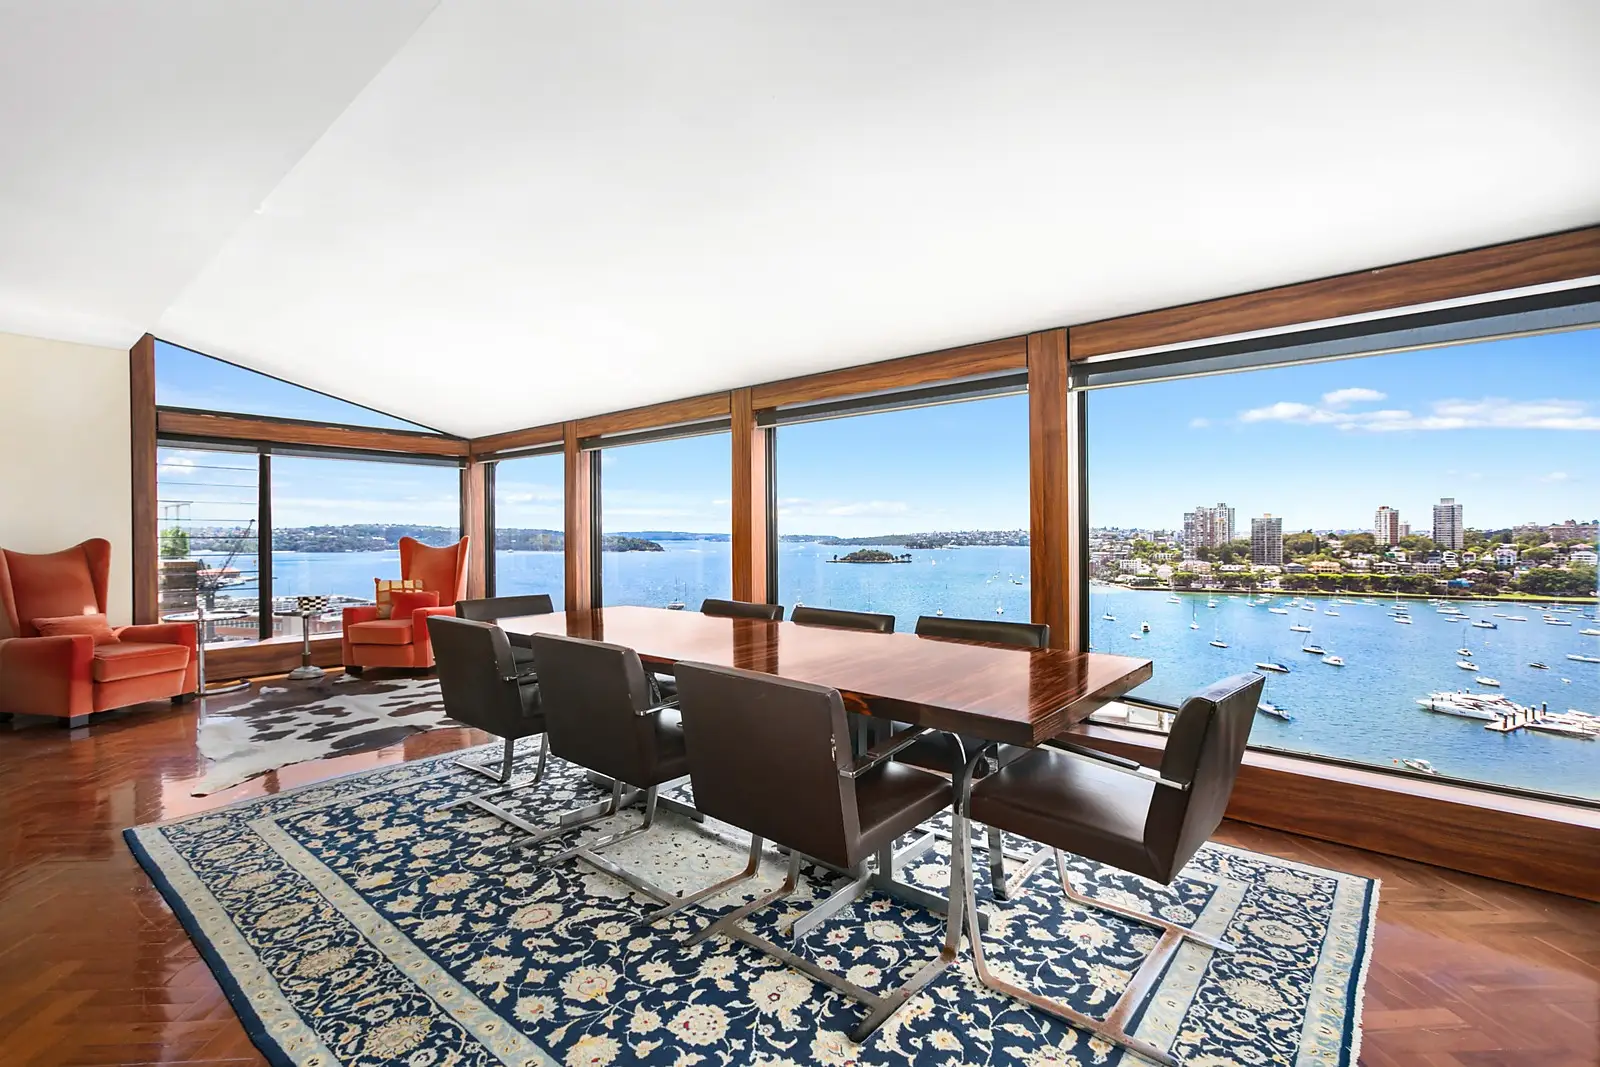 Photo #1: 906/12 Macleay Street, Potts Point - Sold by Sydney Sotheby's International Realty